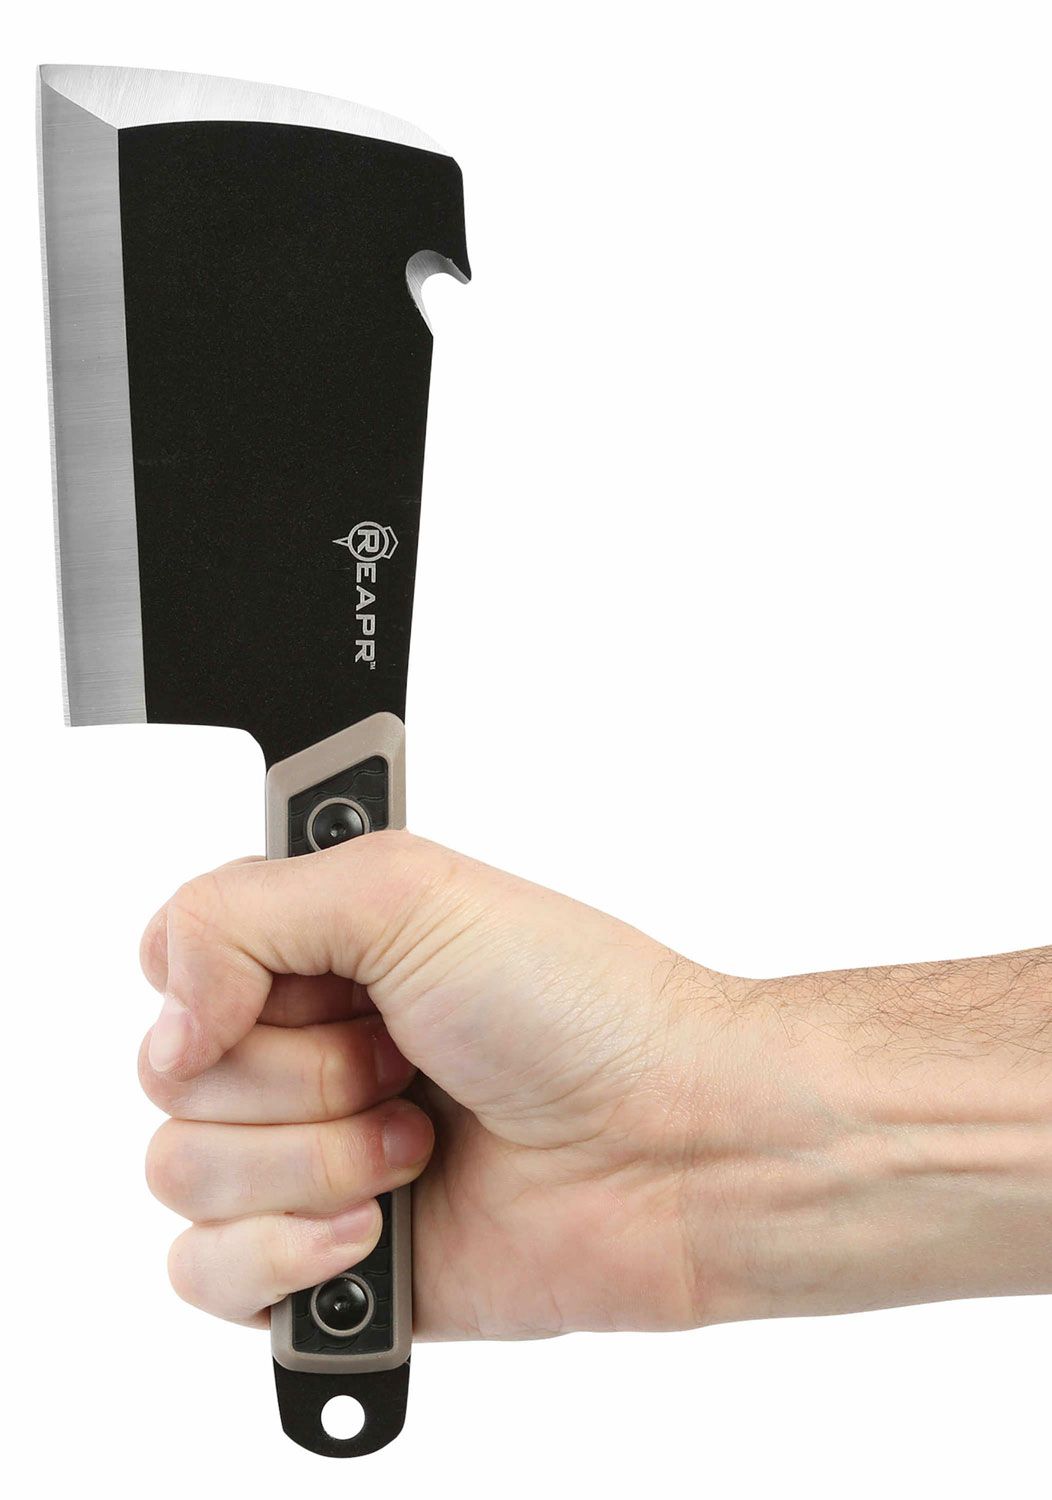 REAPR 11016 Versa Cleavr Cleaver Knife for Meat Cutting